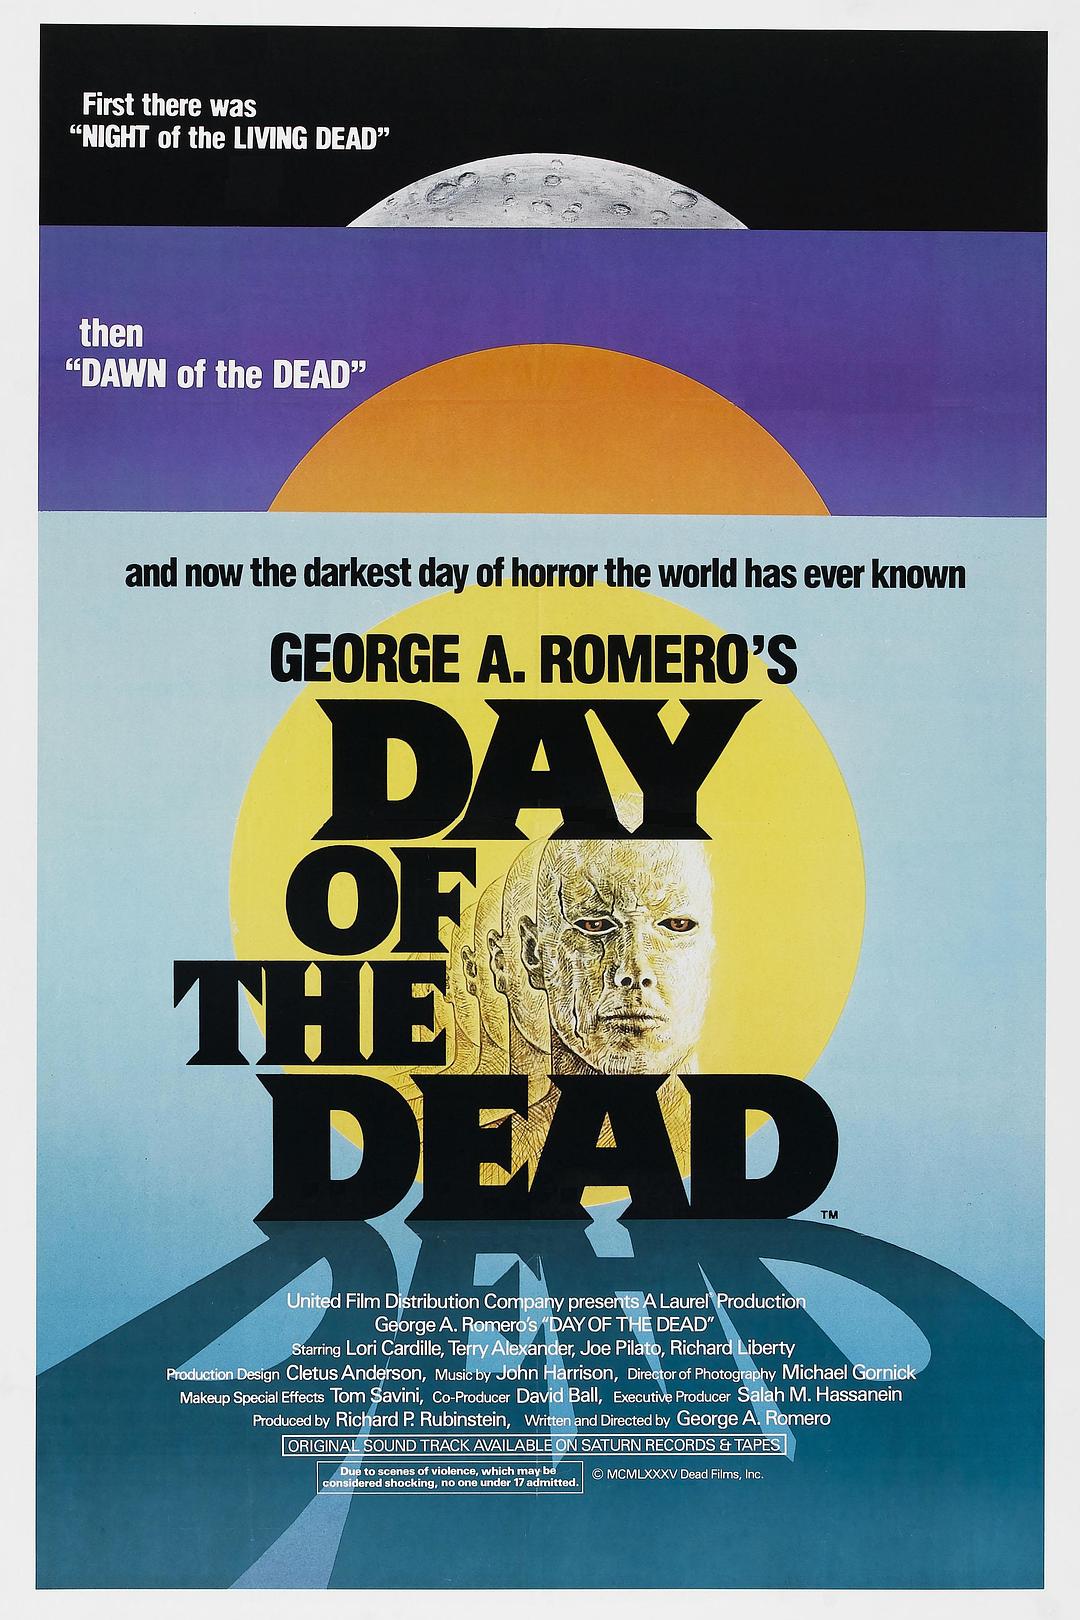 ɥʬ Day.Of.The.Dead.1985.REMASTERED.1080p.BluRay.x264-CREEPSHOW 8.73GB-1.png